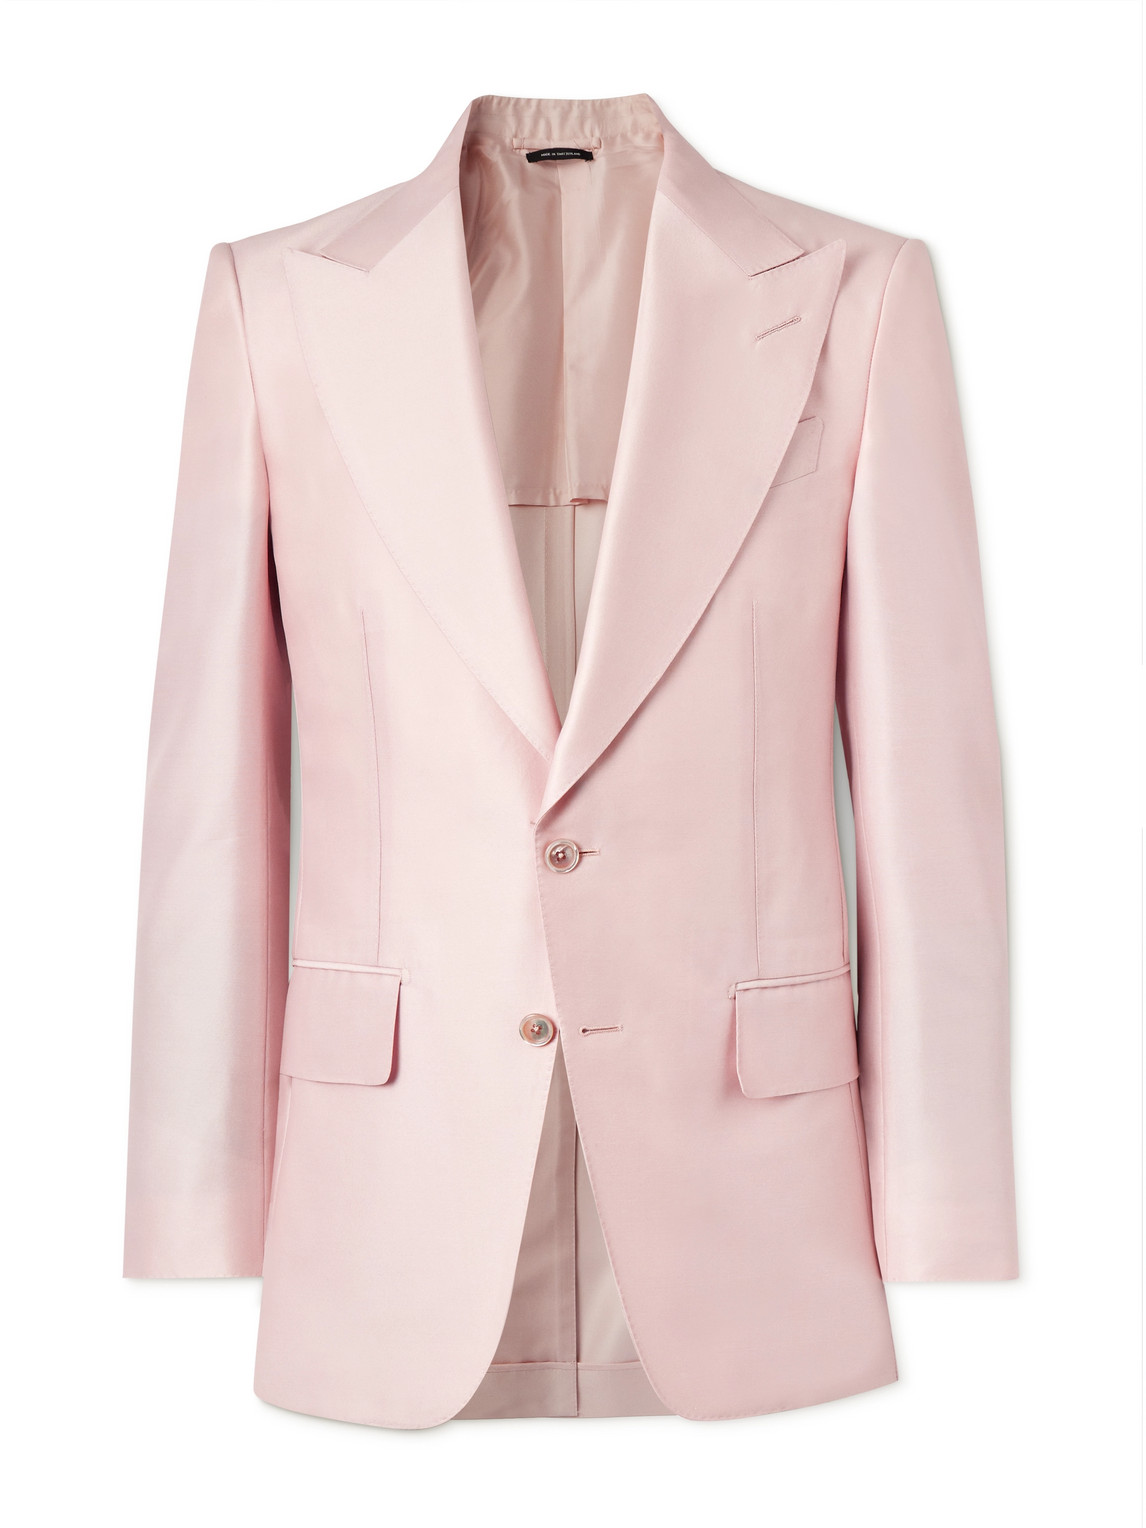 TOM FORD ATTICUS WOOL AND SILK-BLEND SUIT JACKET